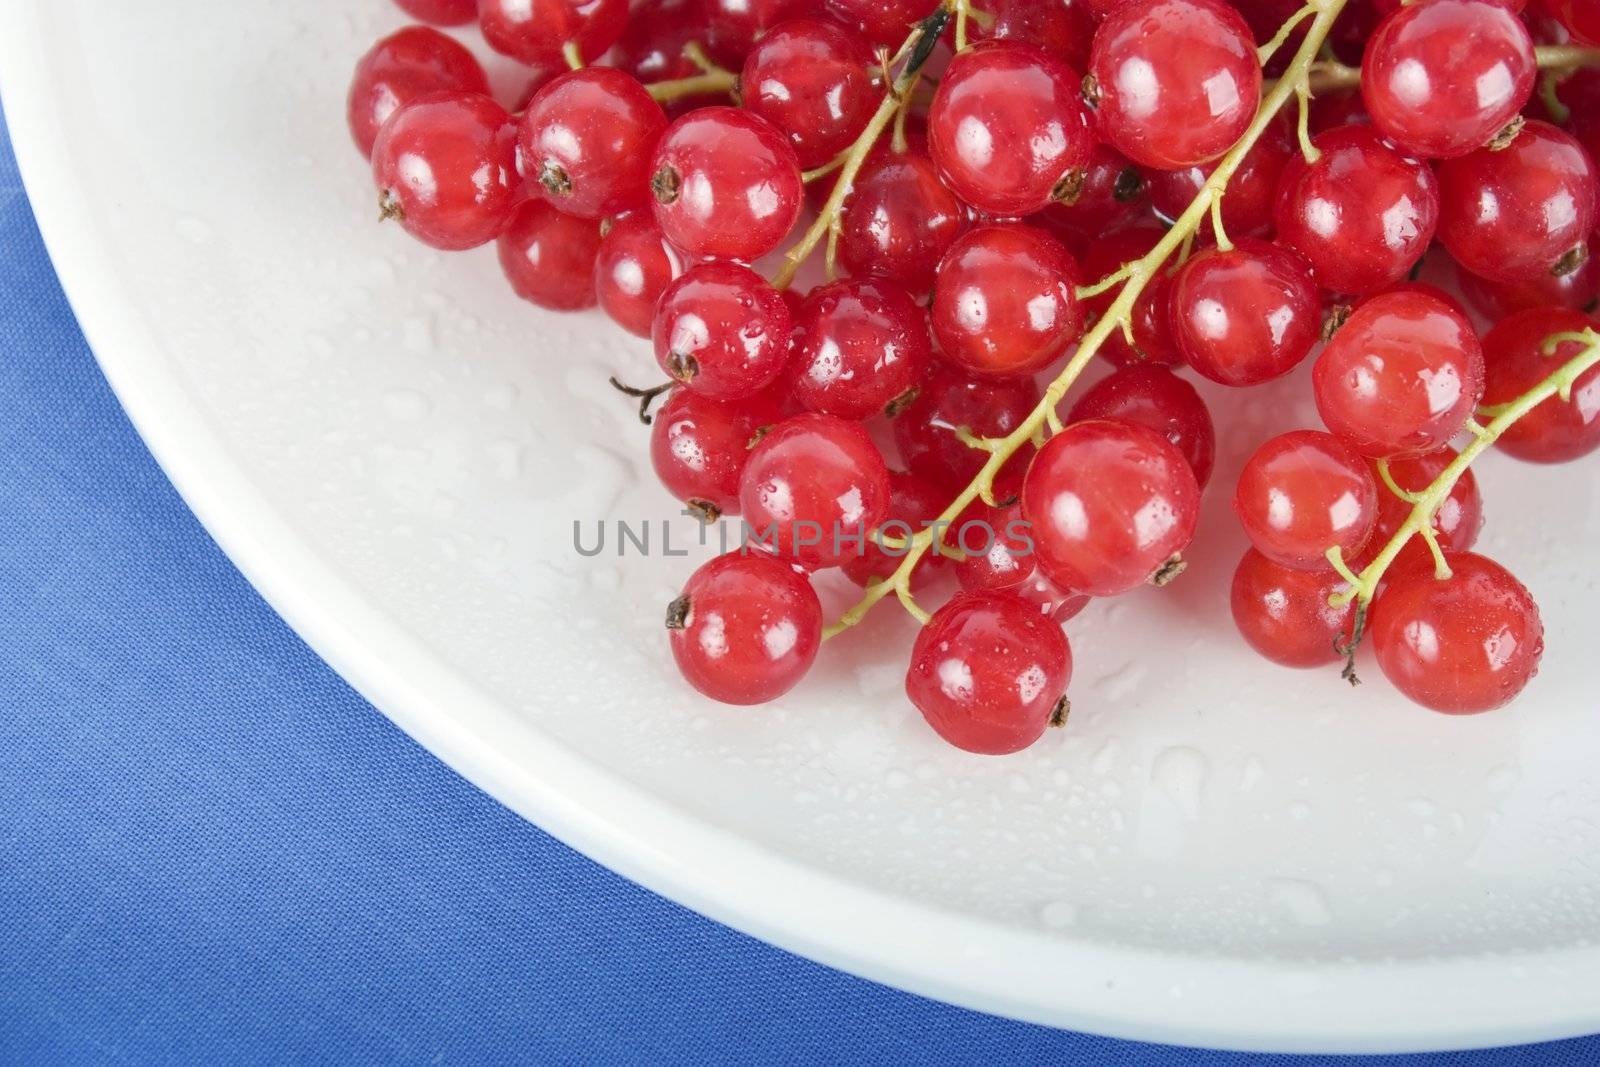 Close up of red currants on white plate with blue table cloth.